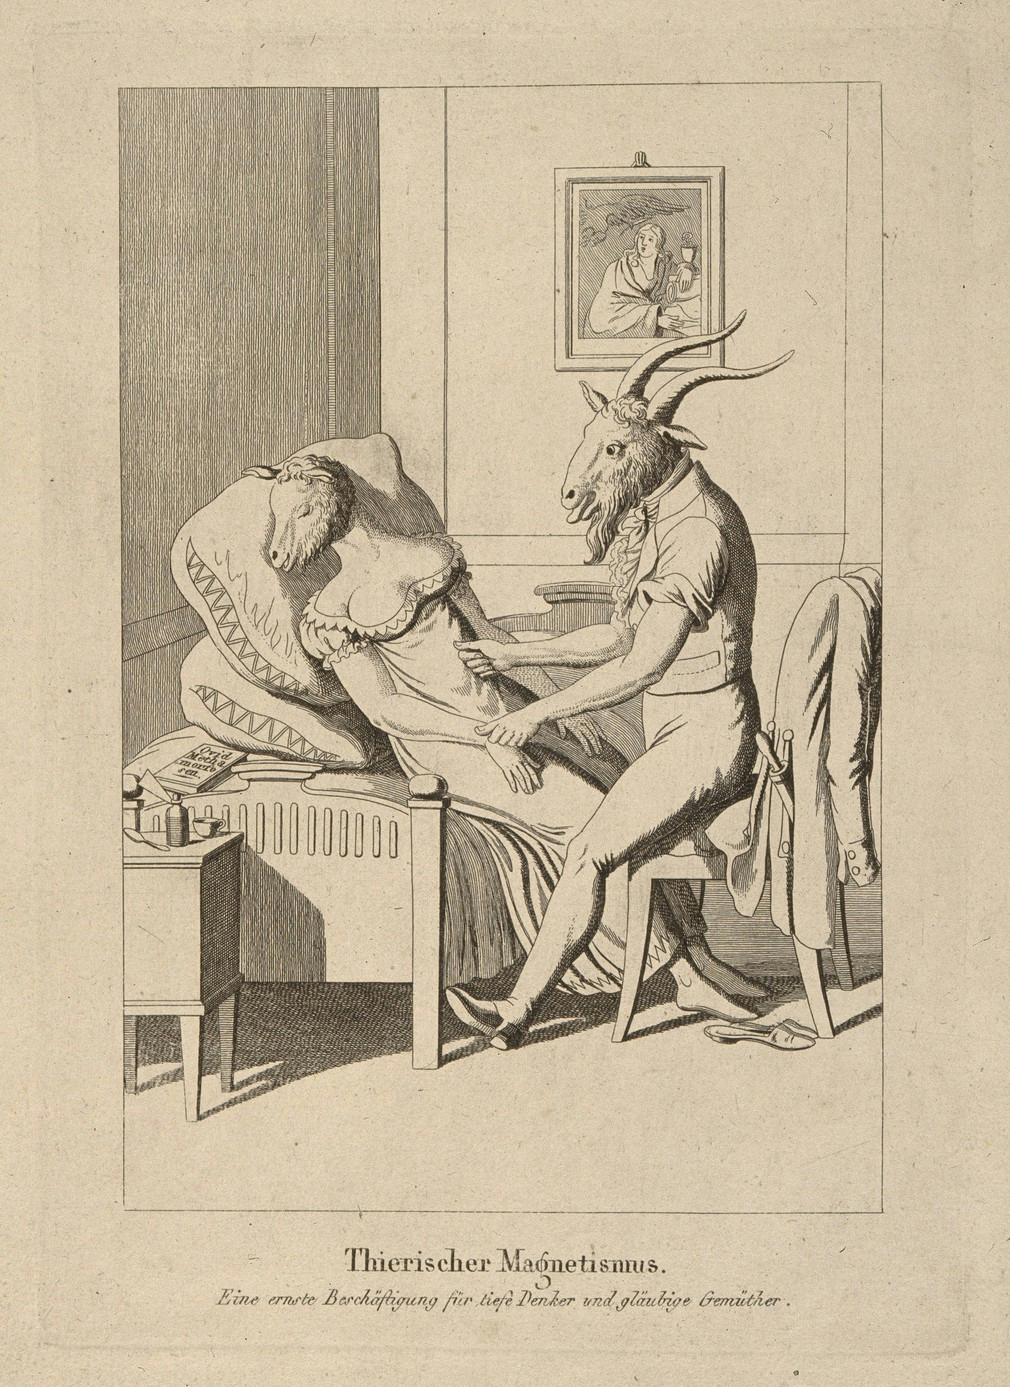 Image of woman with a sheep's head reclining on a coach. A man with a goat's head sits on a chair and leans over her.